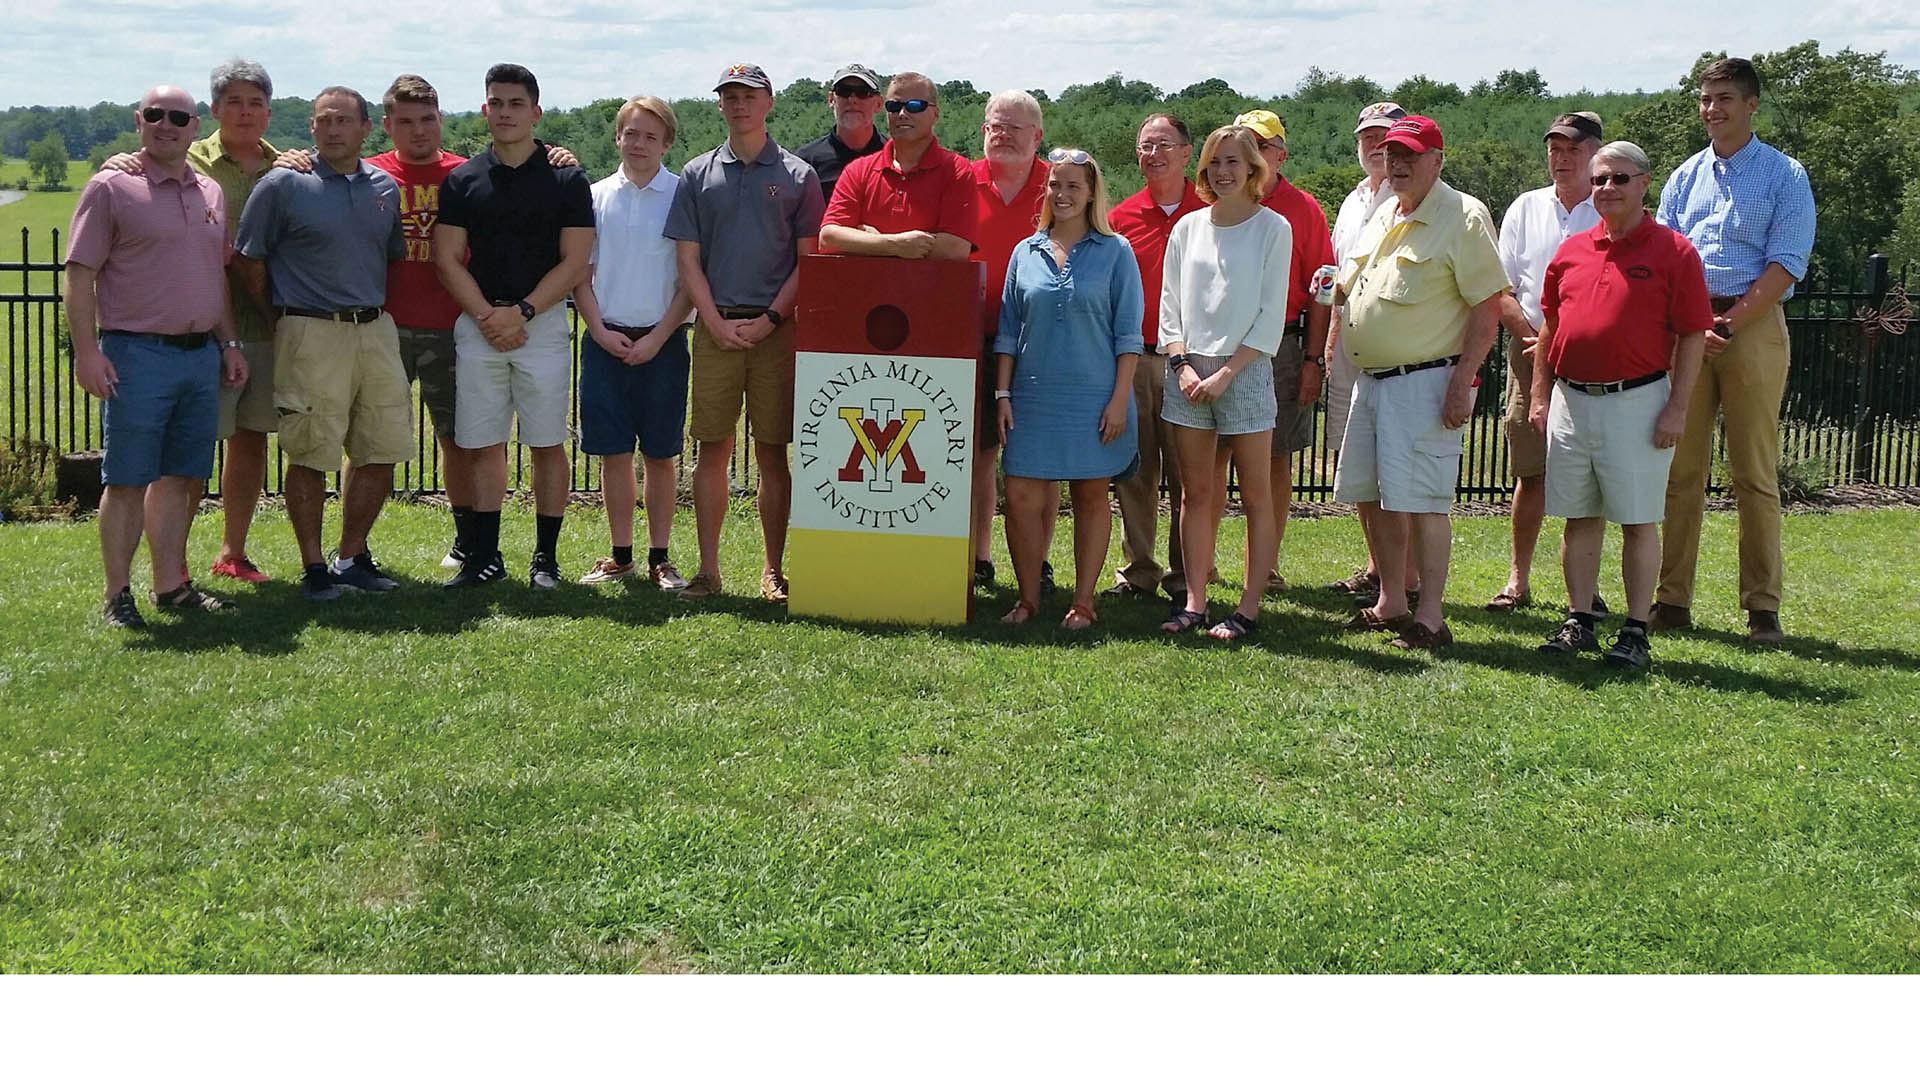 Group of men and women pose with VMI cornhole board, smiling.